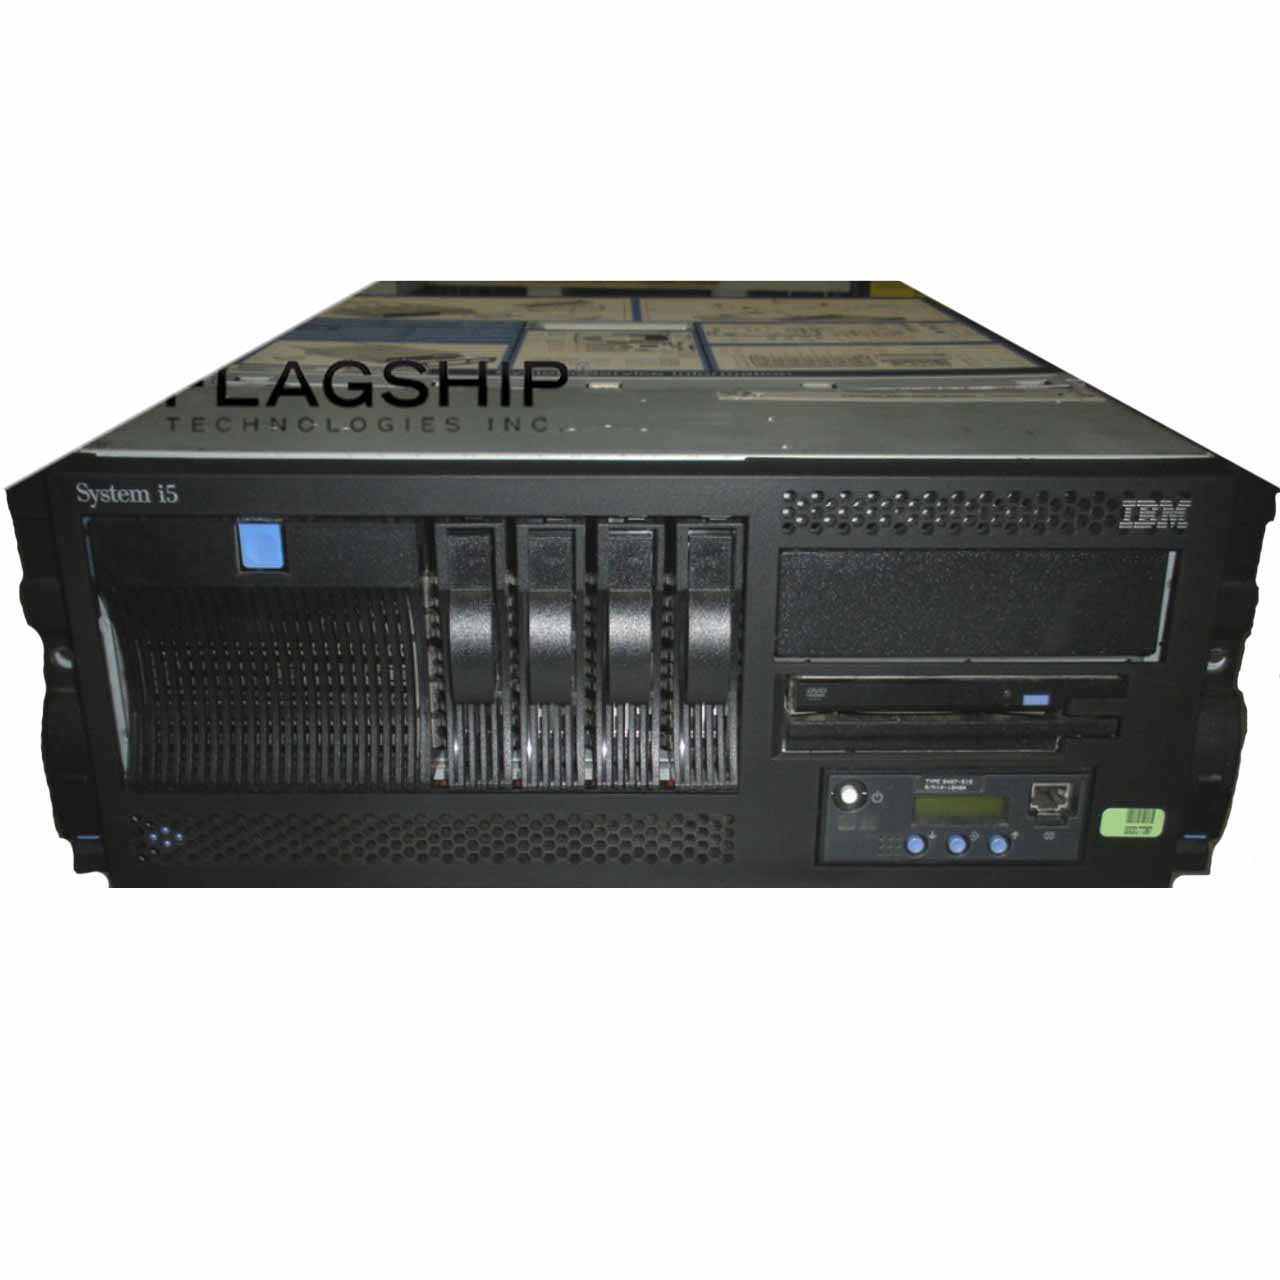 Save on this IBM System i 515 Express Servers from your trusted partners at Flagship Technologies.